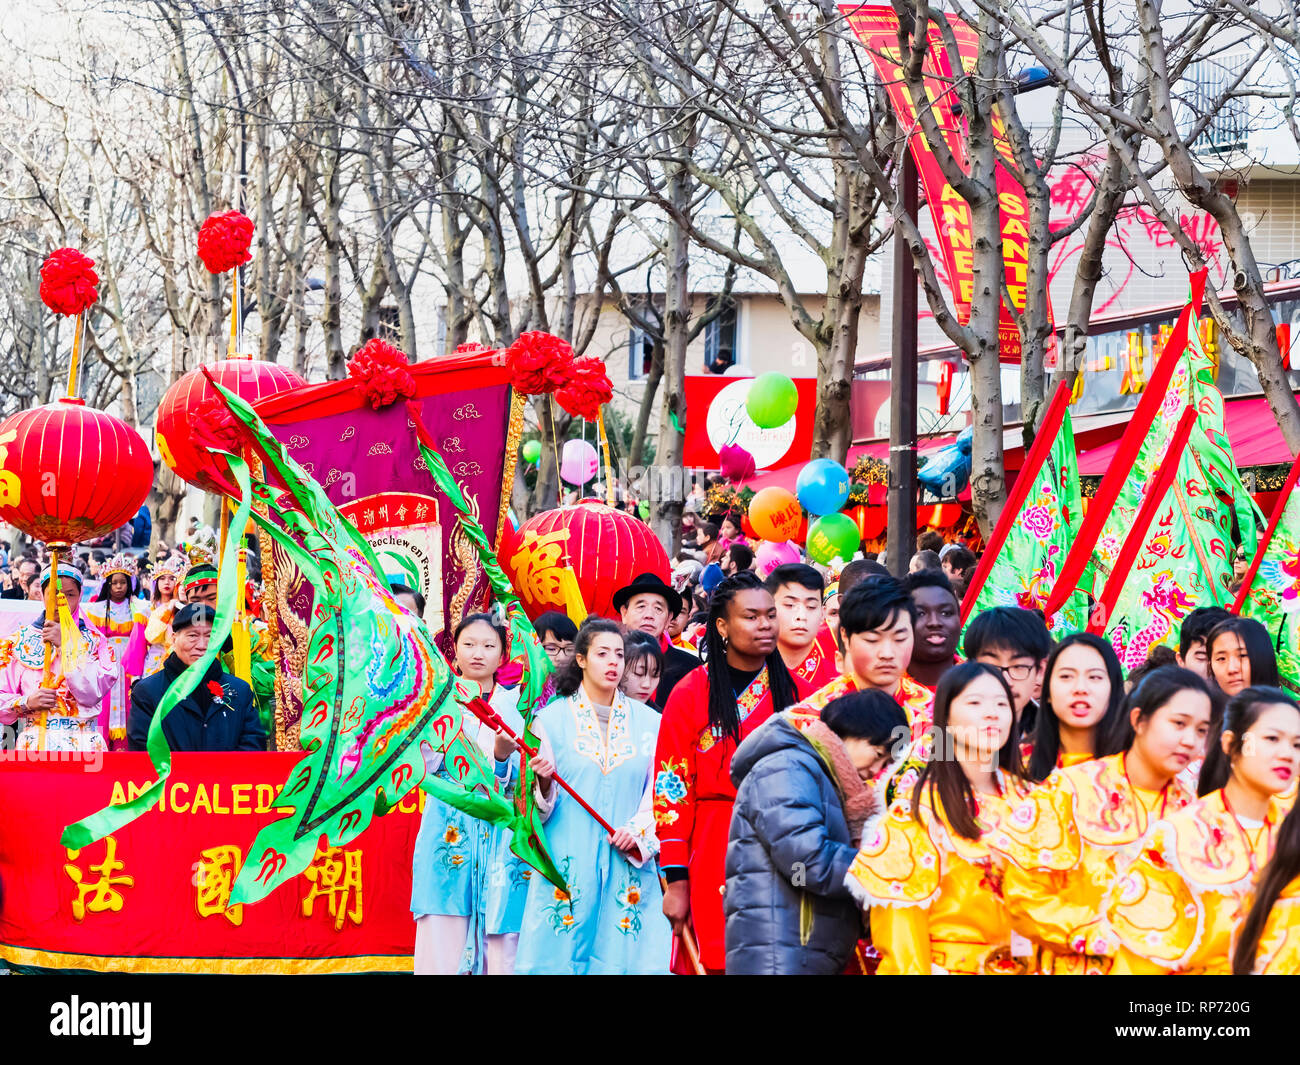 PARIS, FRANCE - FEBRUARY 17, 2019. Last day of the chinese new year celebration festival in street. People dragon lion dancing show colorful costumes. Stock Photo